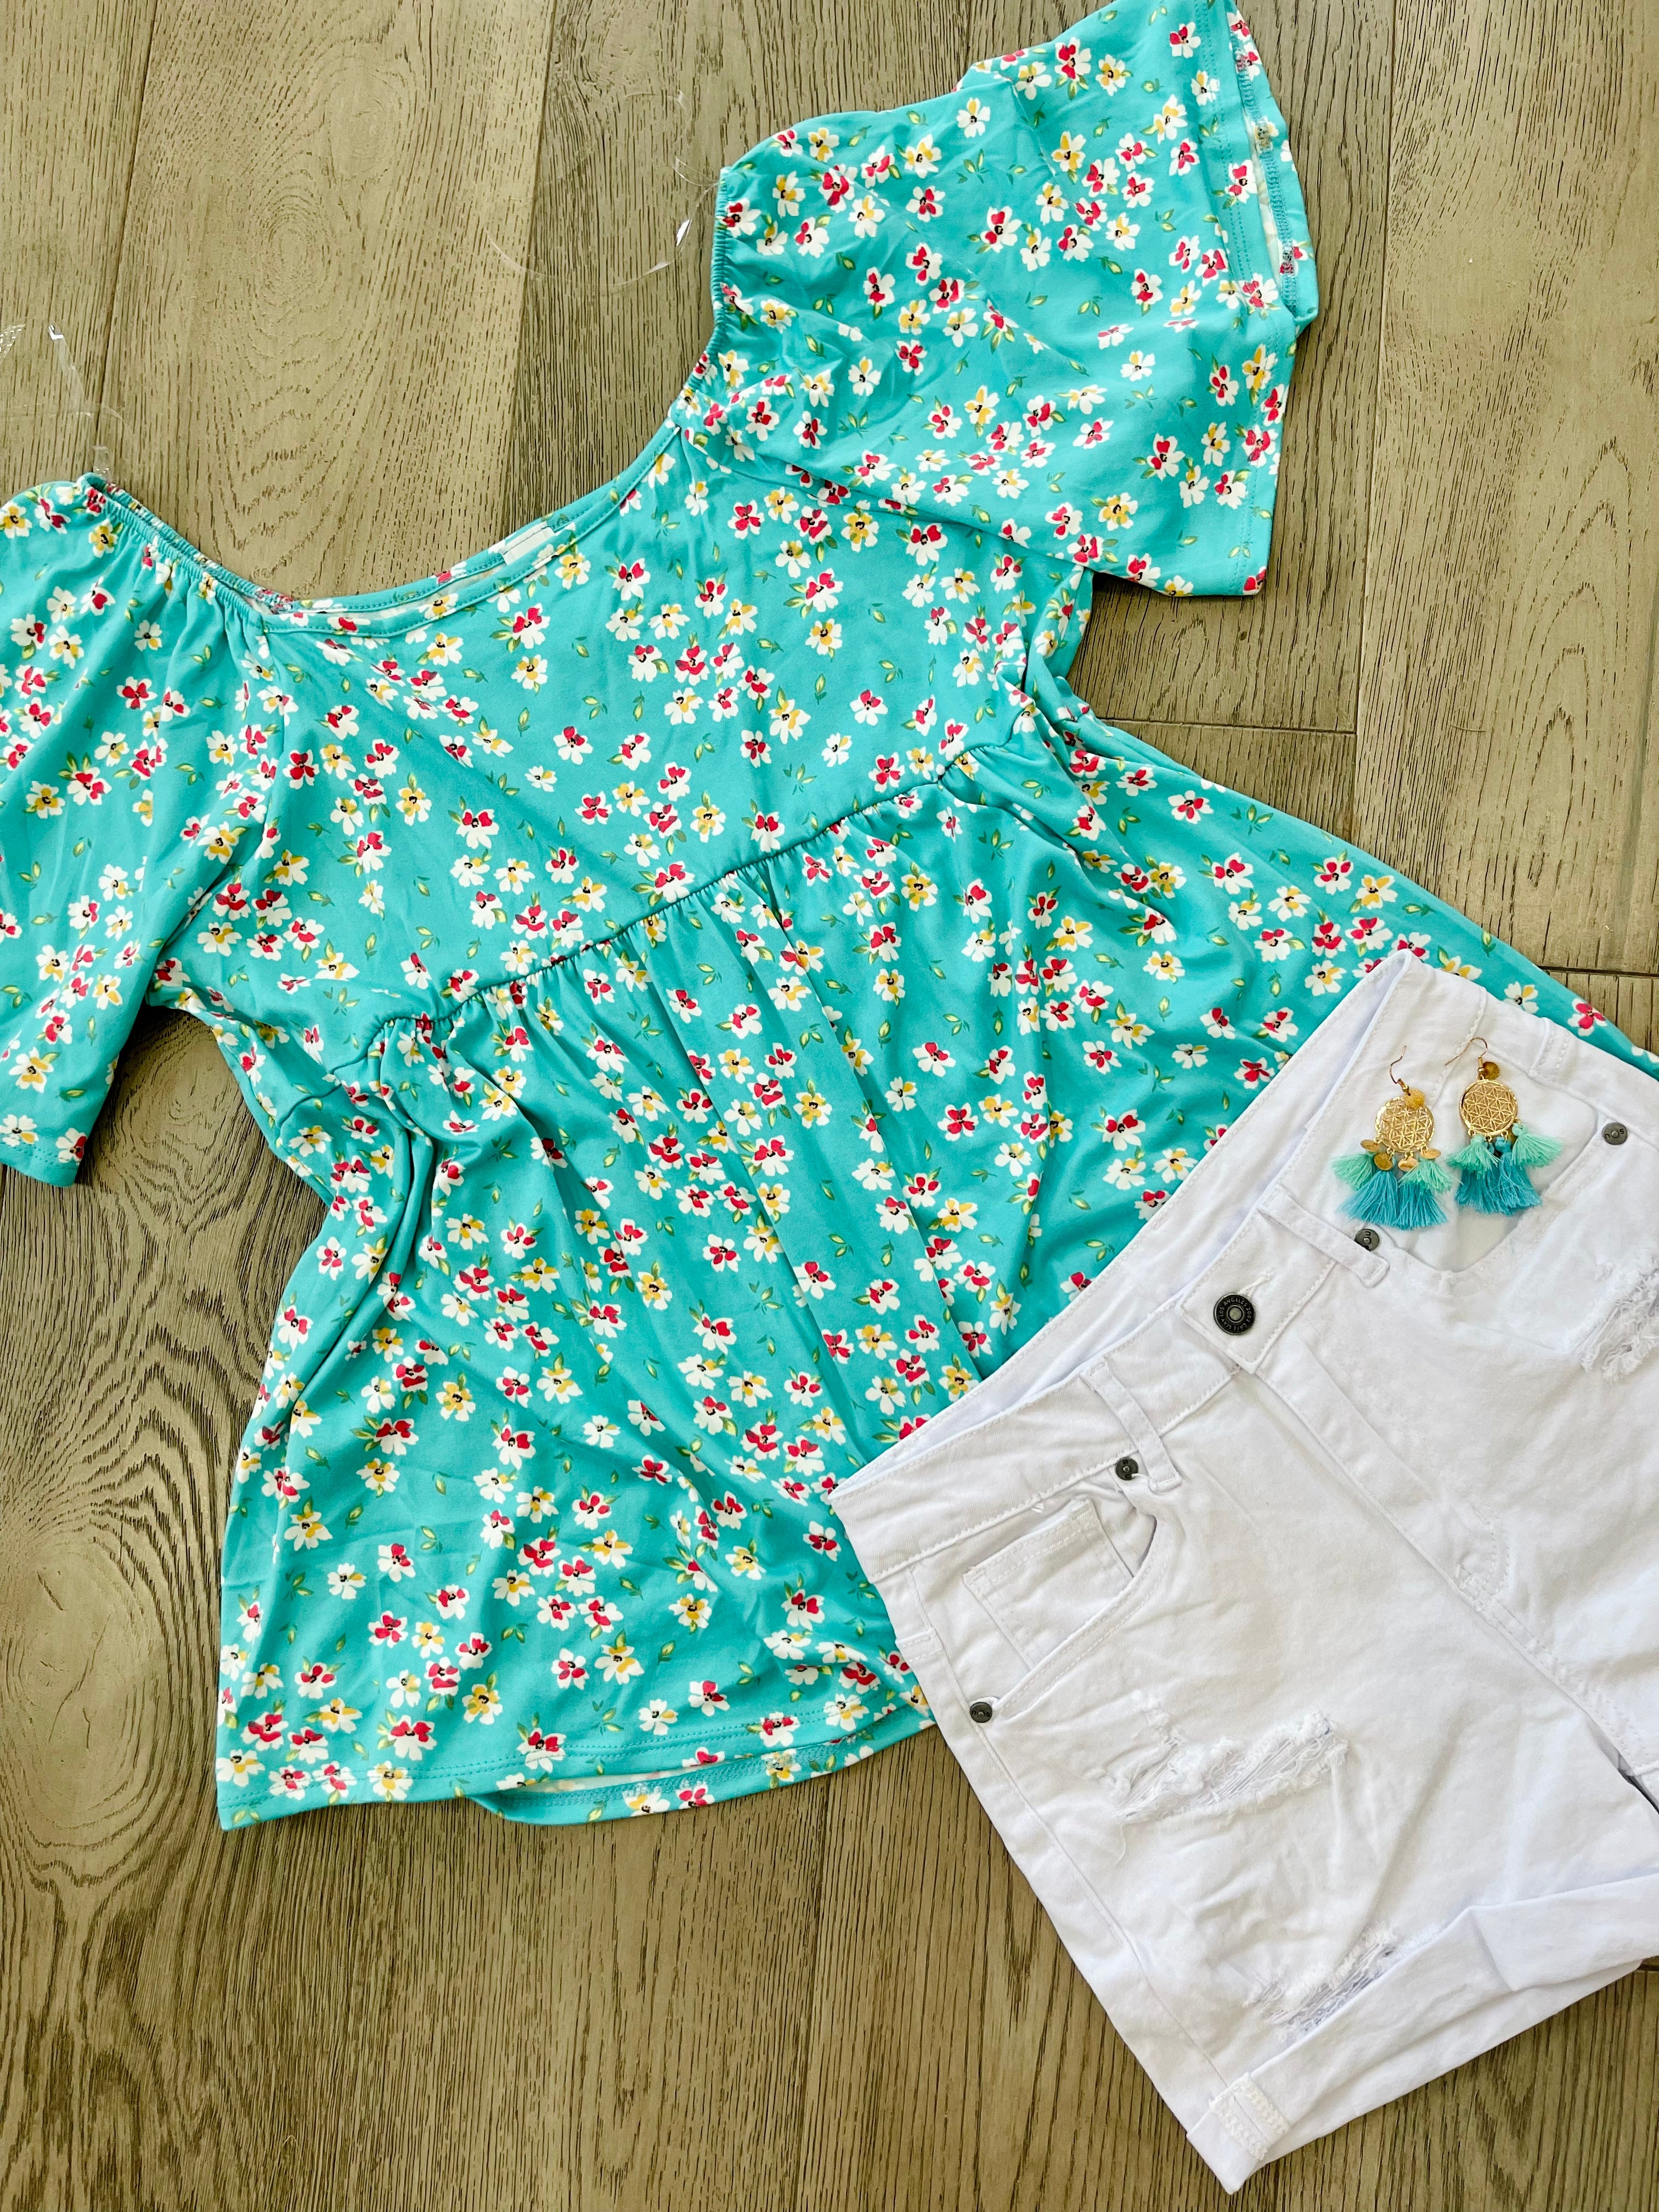 Teal green floral top